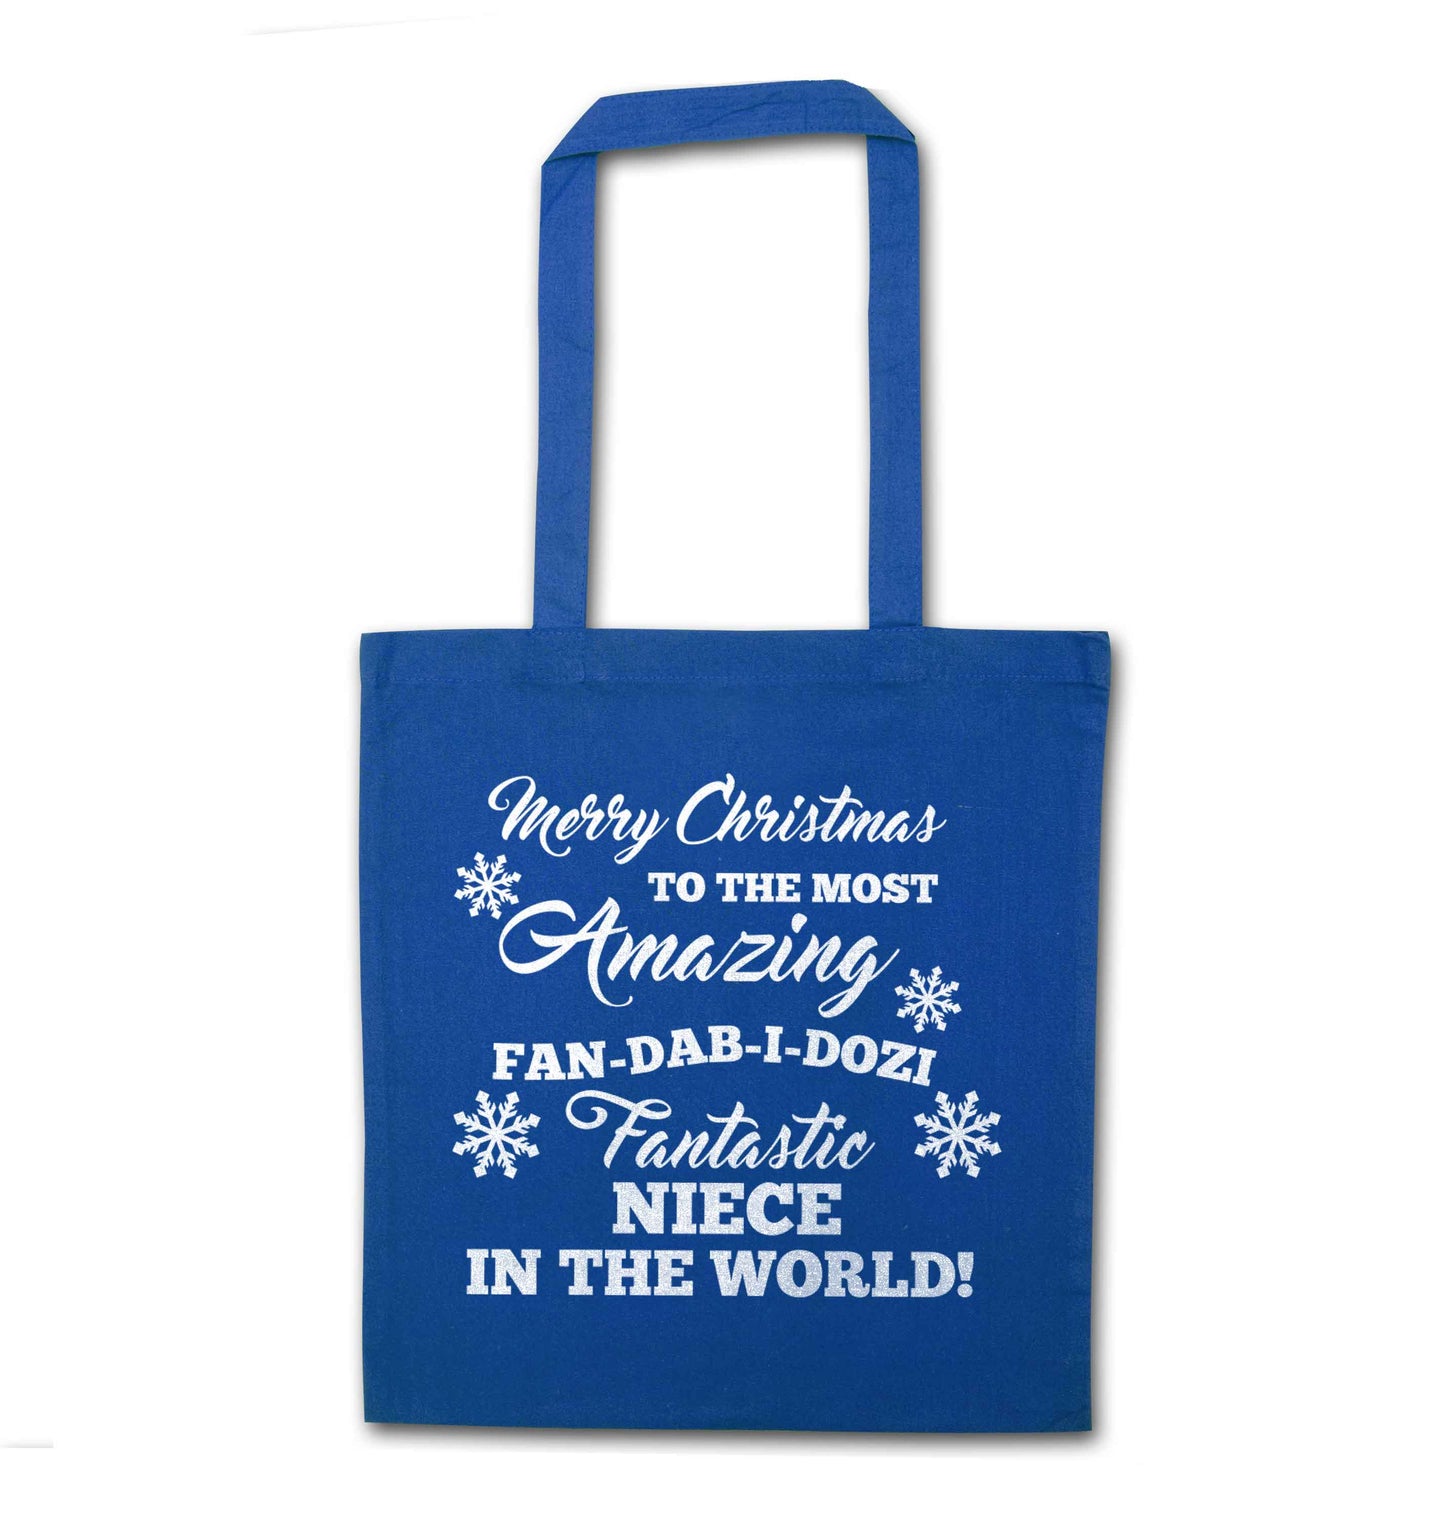 Merry Christmas to the most amazing fan-dab-i-dozi fantasic Niece in the world blue tote bag